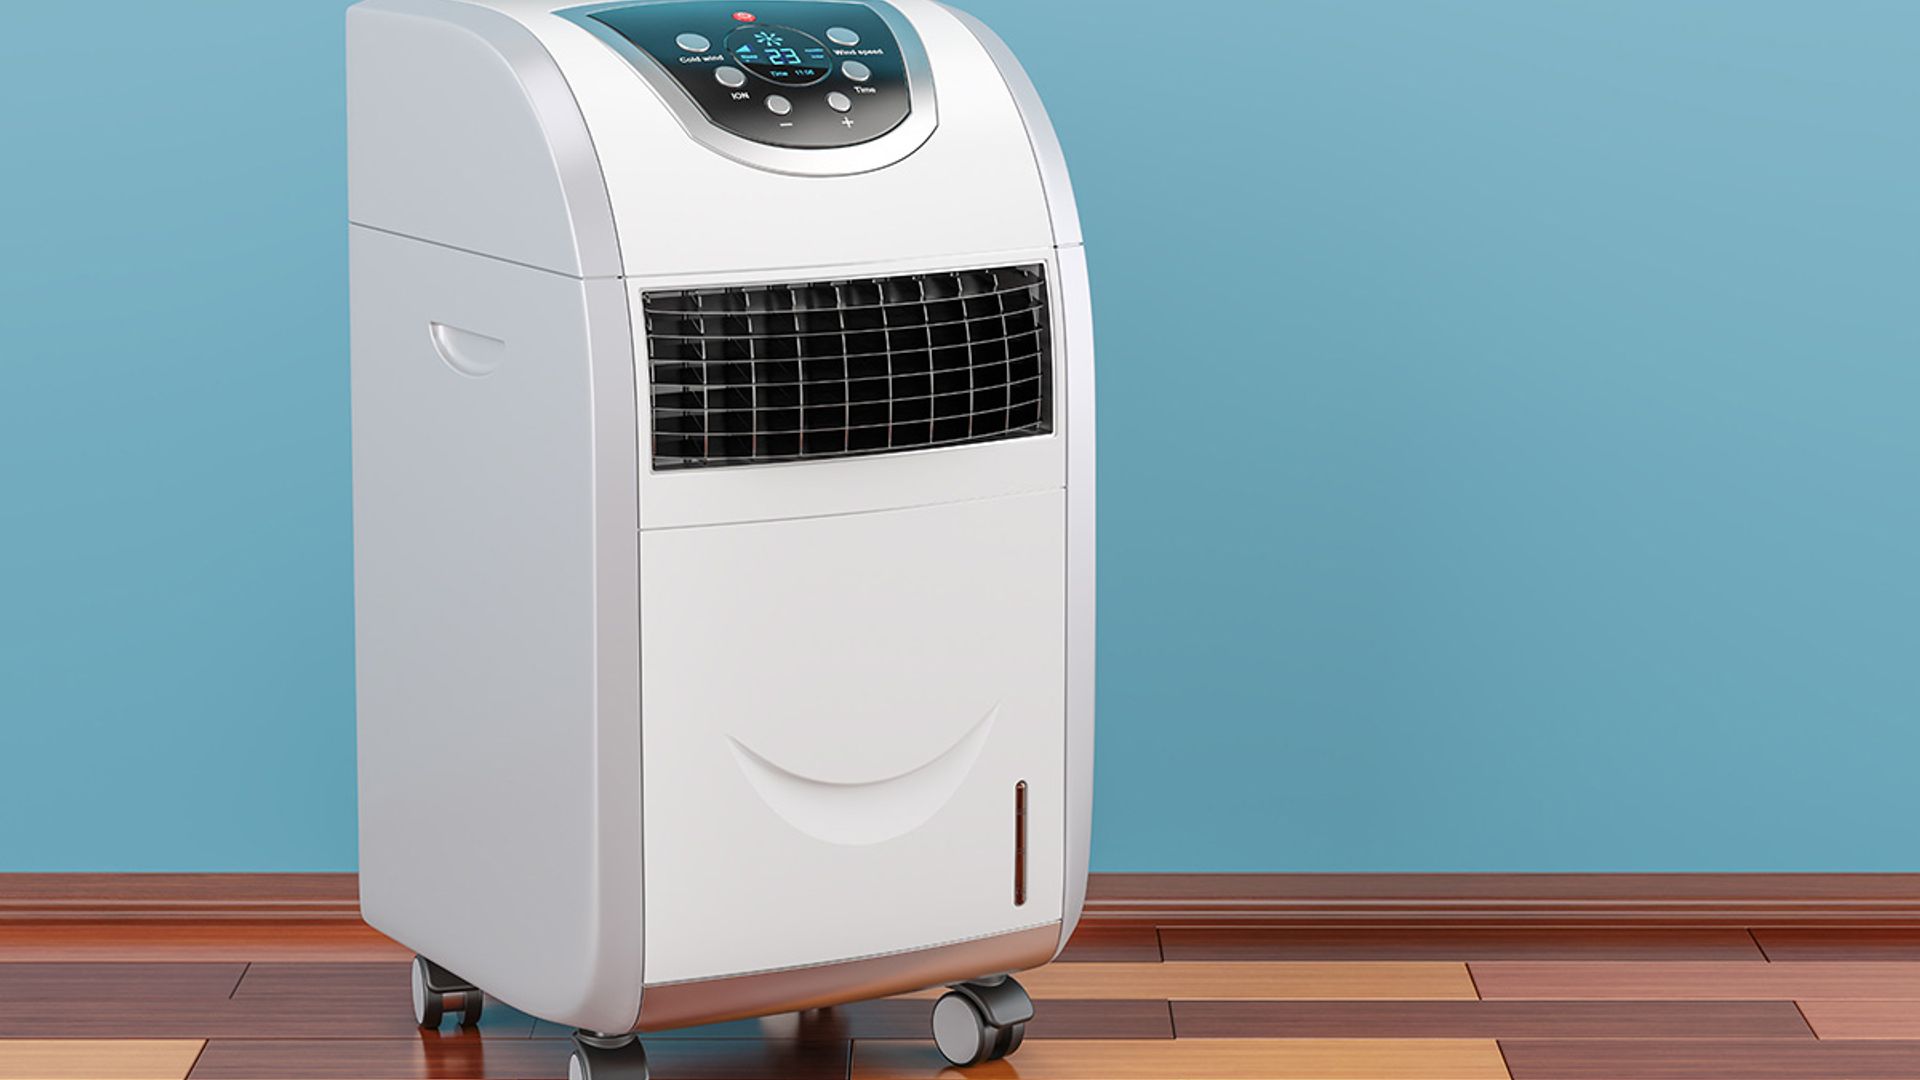 Struggling through the heatwave? We’ve found all of the best air conditioning units this summer